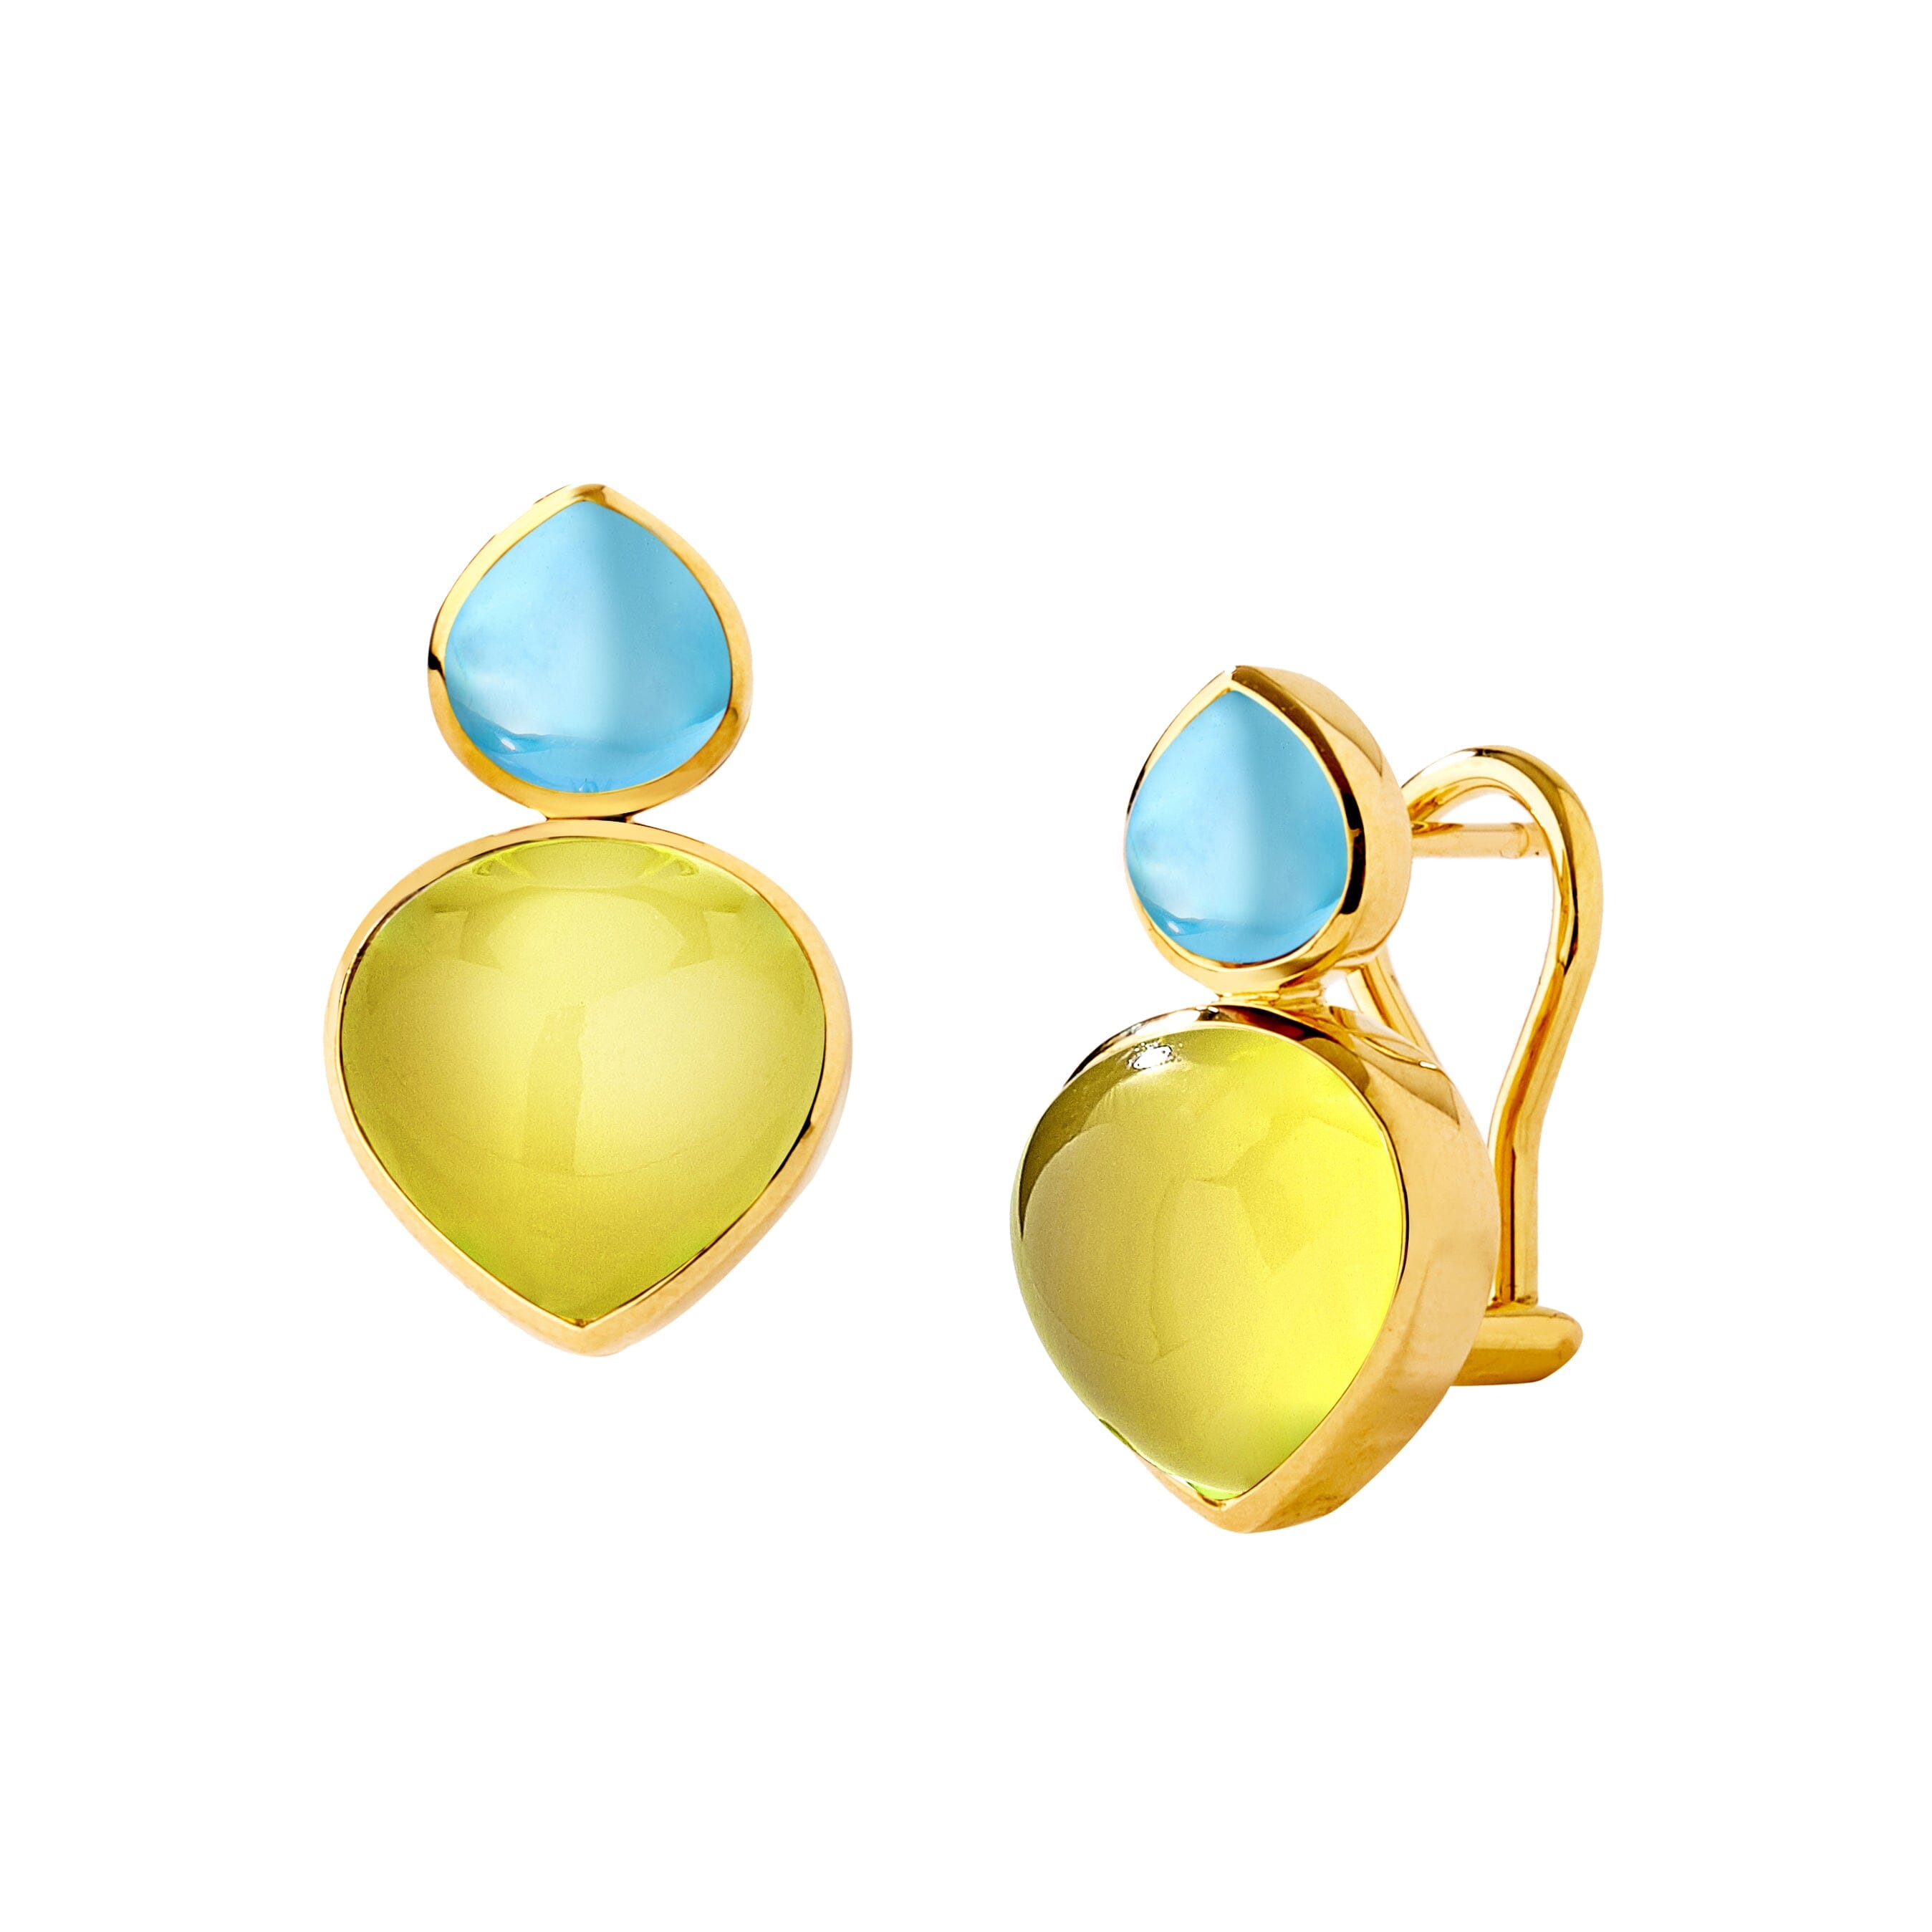 Quiet Luxury Women Earrings Shop with Syna Jewels
– SYNAJEWELS